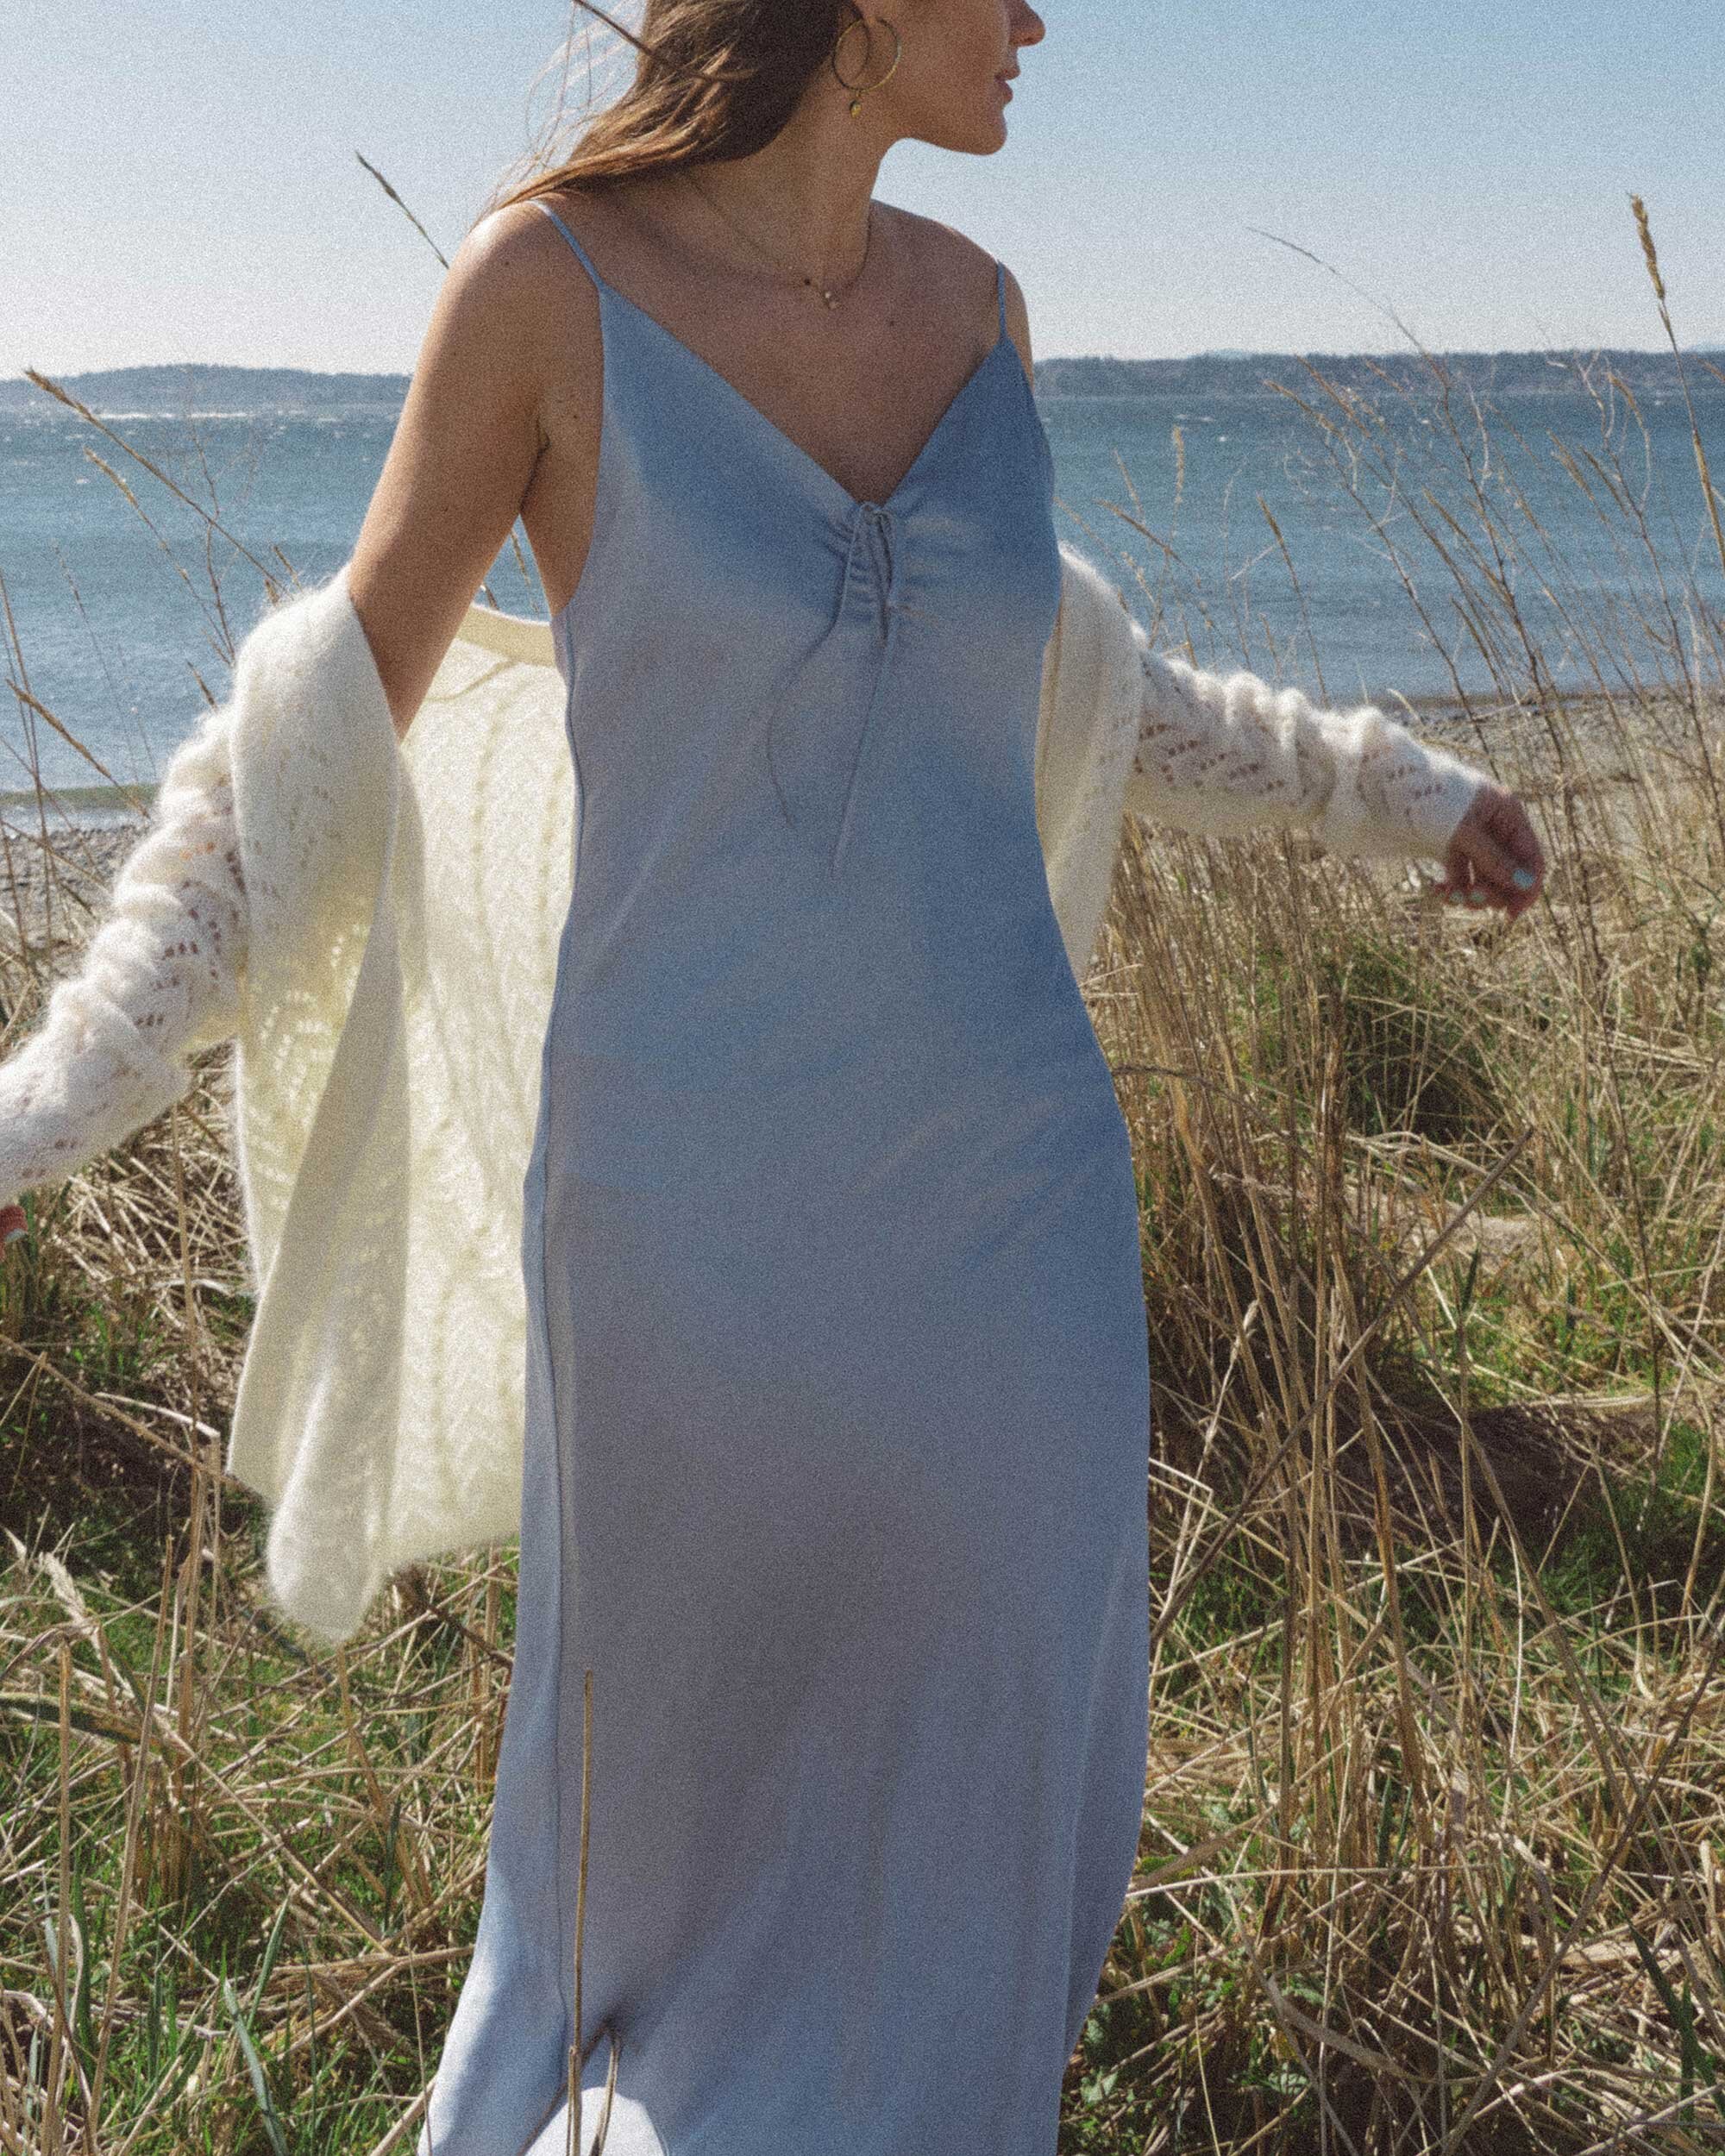 Easy-spring-outfit.-Sarah-Butler-of-@sarahchristine-wearing-Paige-Sela-Silk-Slip-Dress-in-Dream-Blue-in-Seattle,-Washington---6-2.jpg